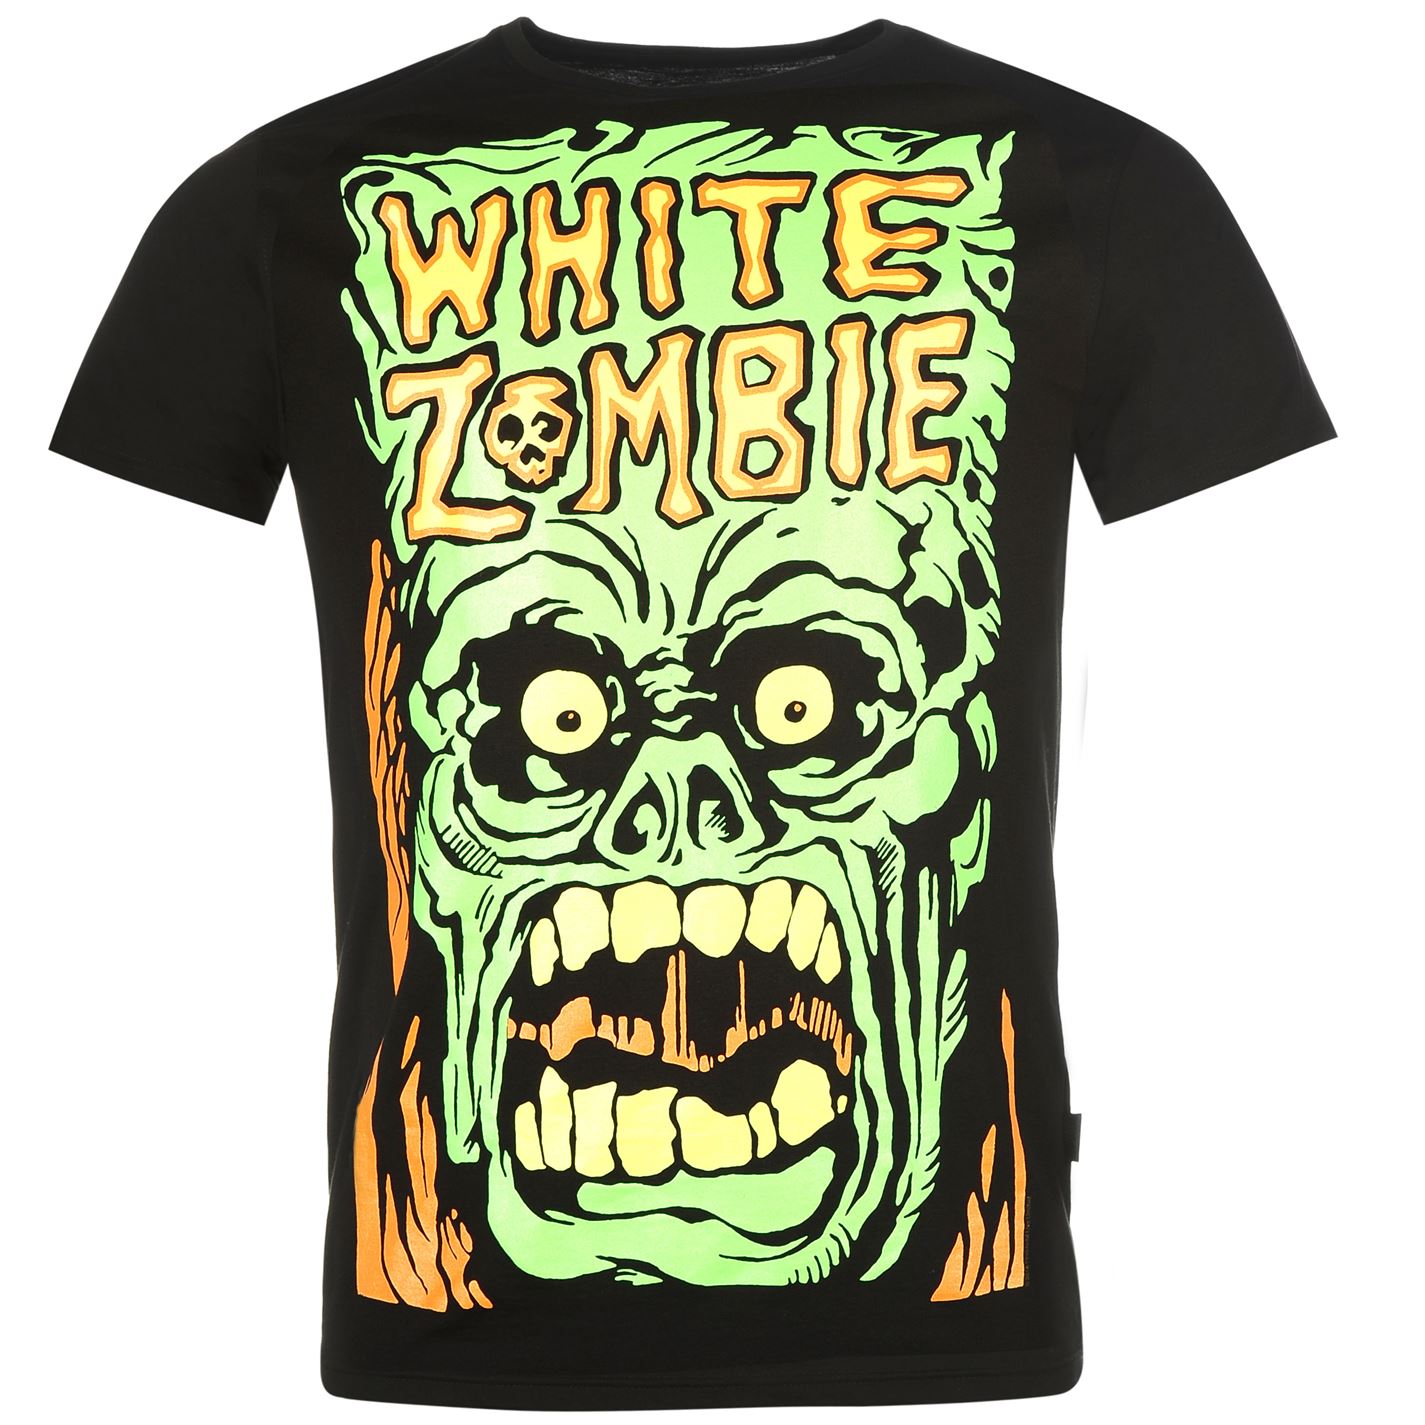 Official White Zombie T Shirt Mens